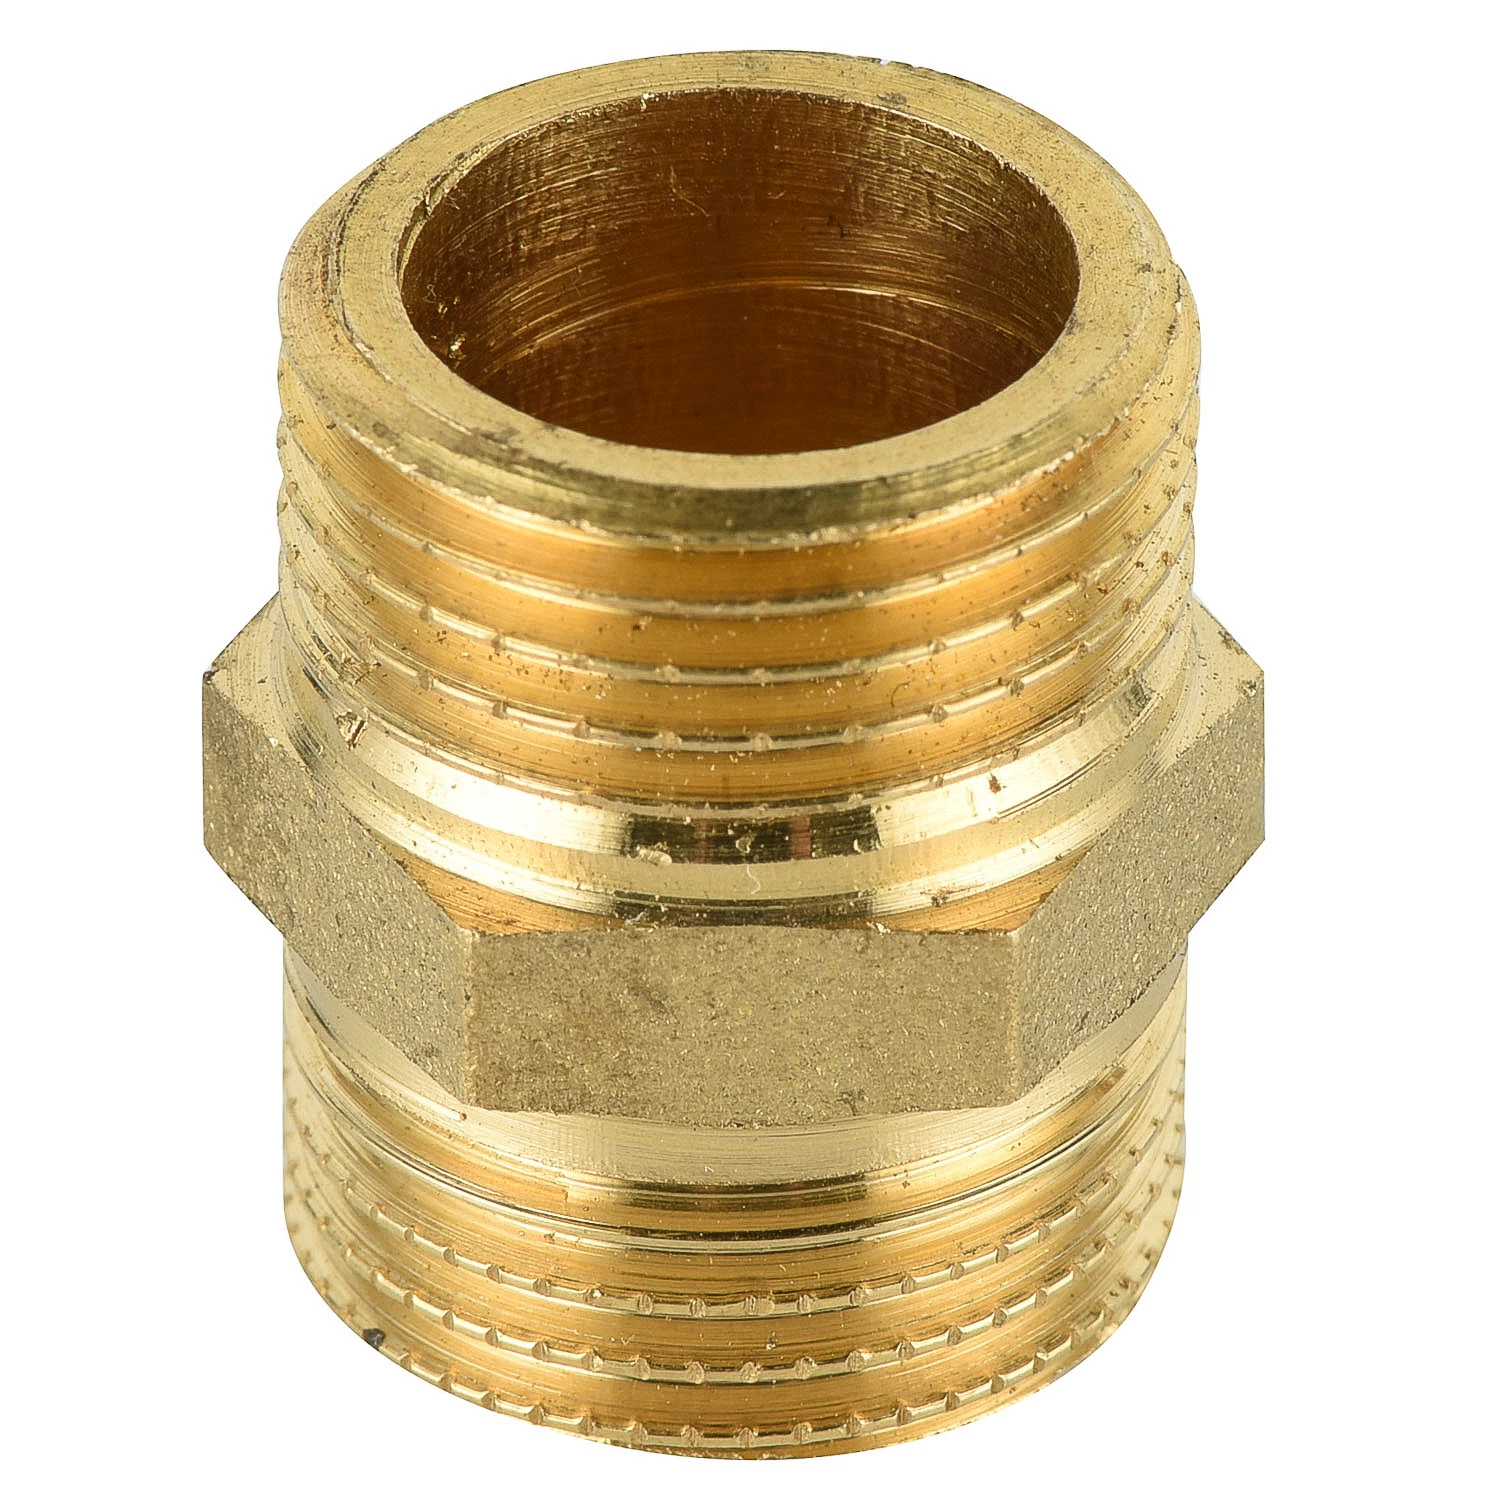 1/2" Brass Pipe Fittings Nipple Thread with Bsp Thread